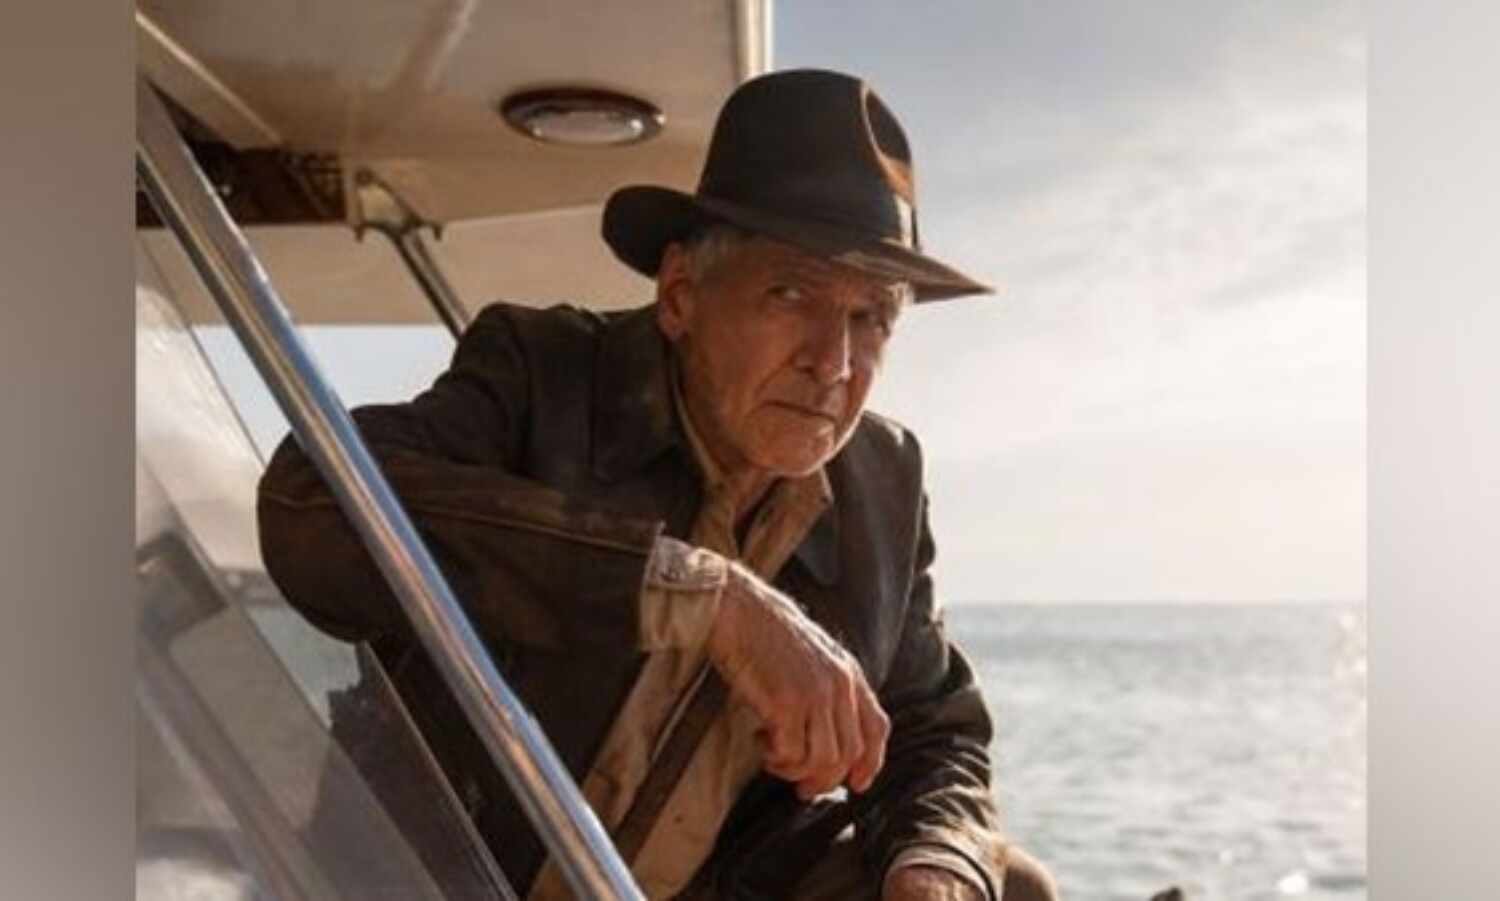 Indiana Jones 5 expected to make its debut at Cannes